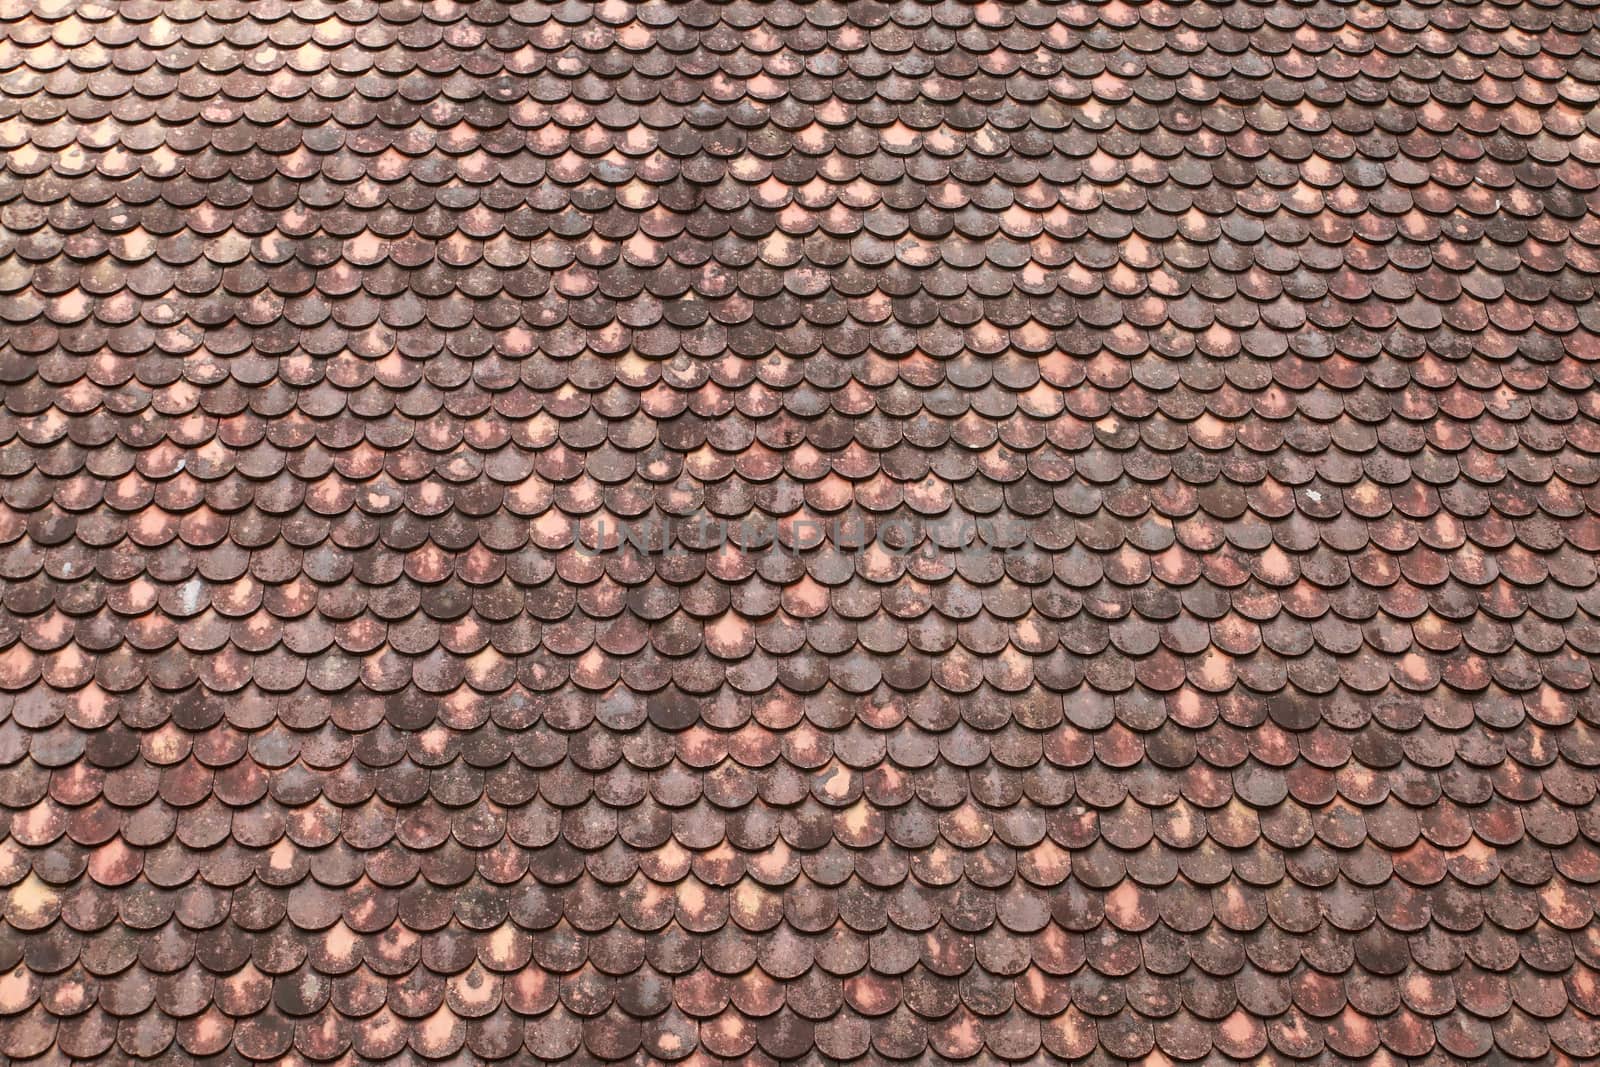 The texture roof made from baked clay.